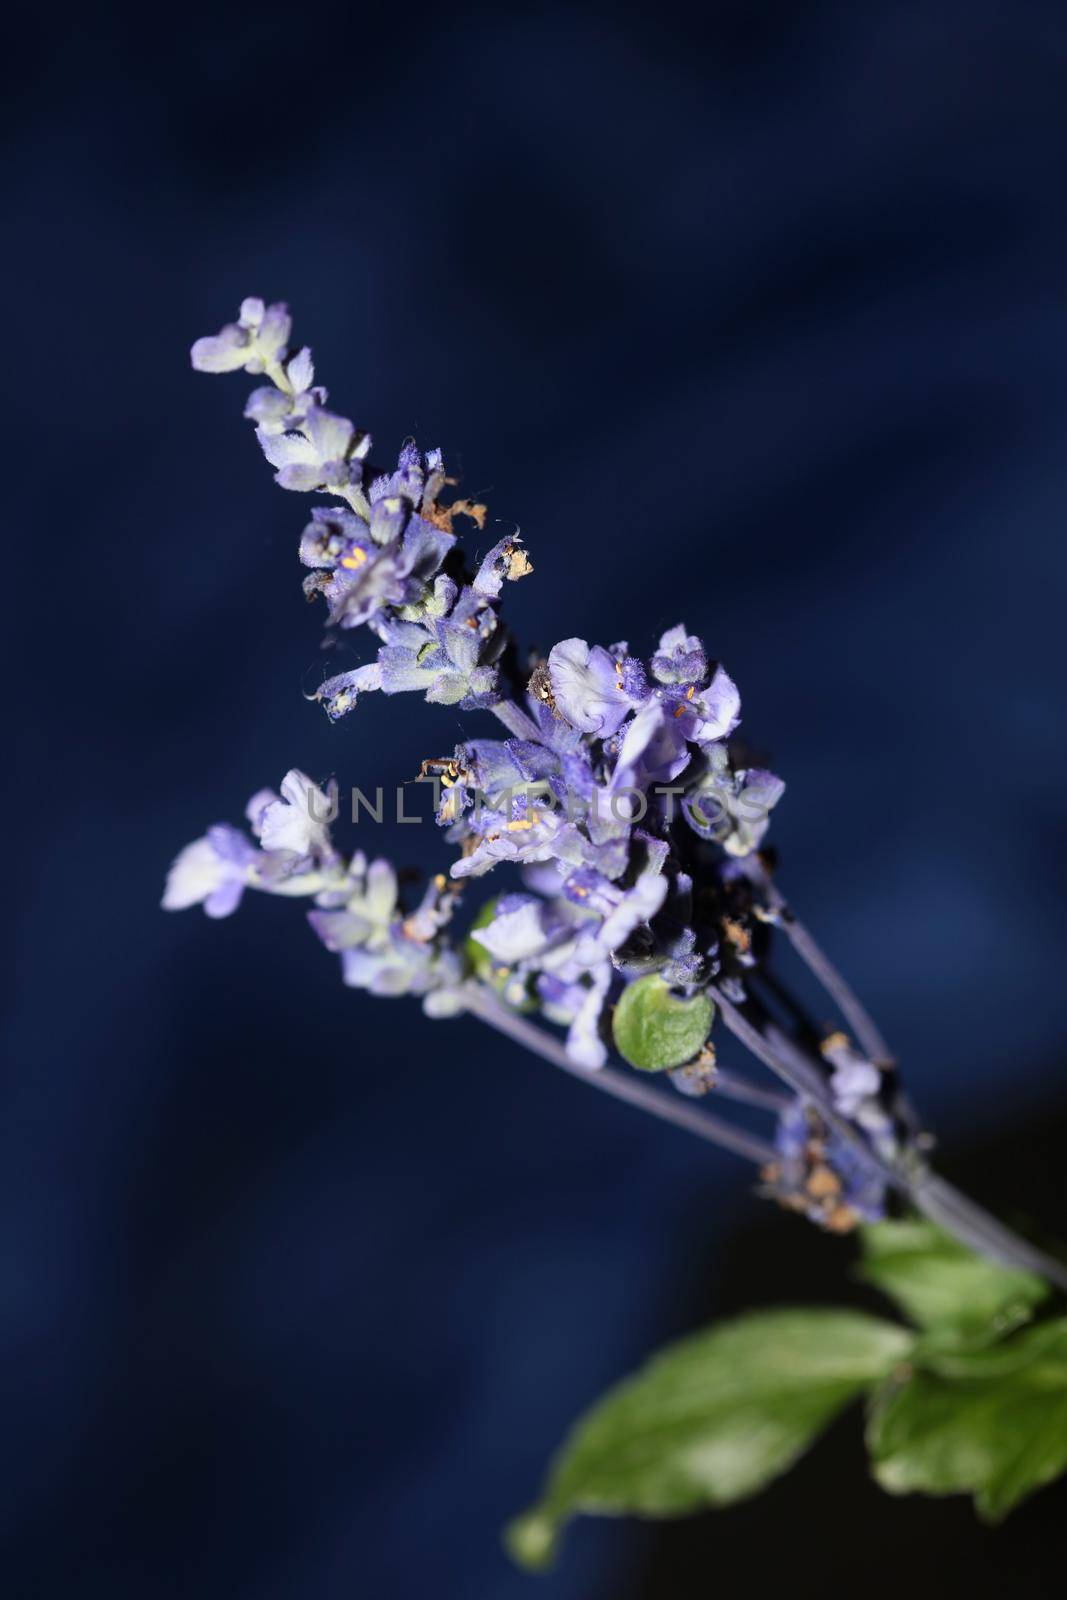 Flower blossom salvia divinorum family lamiaceae close up botanical background high quality big size prints home decor agricultural psychoactive flowers